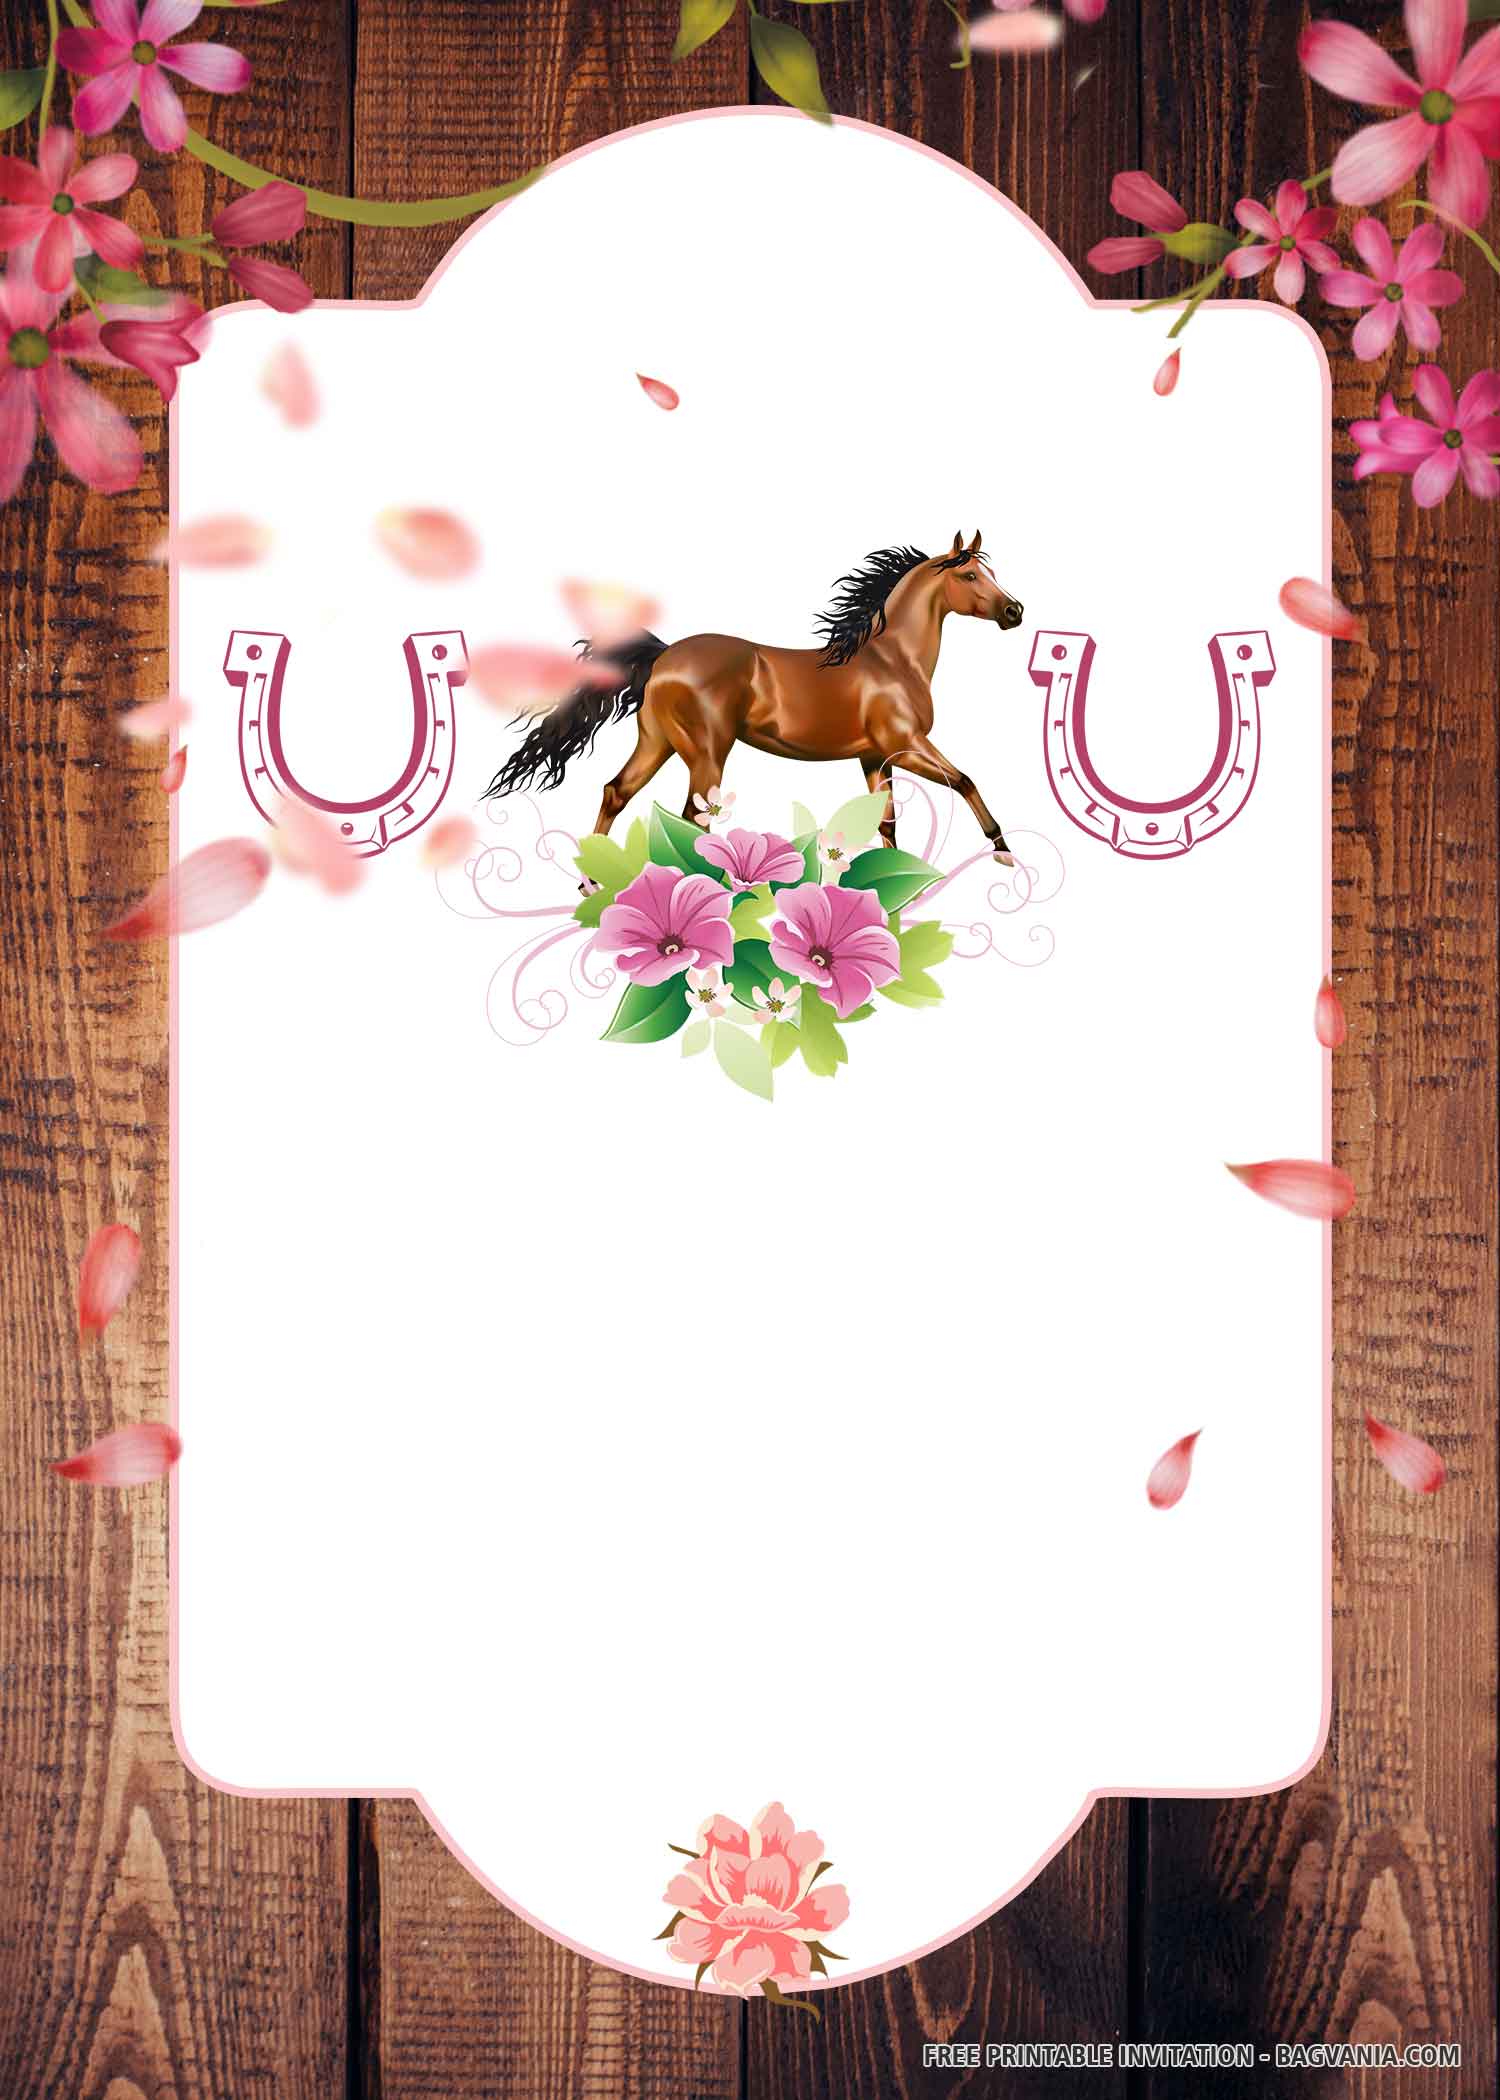 FREE Pink Horse with Horseshoes, Pink Flowers, Wood Background